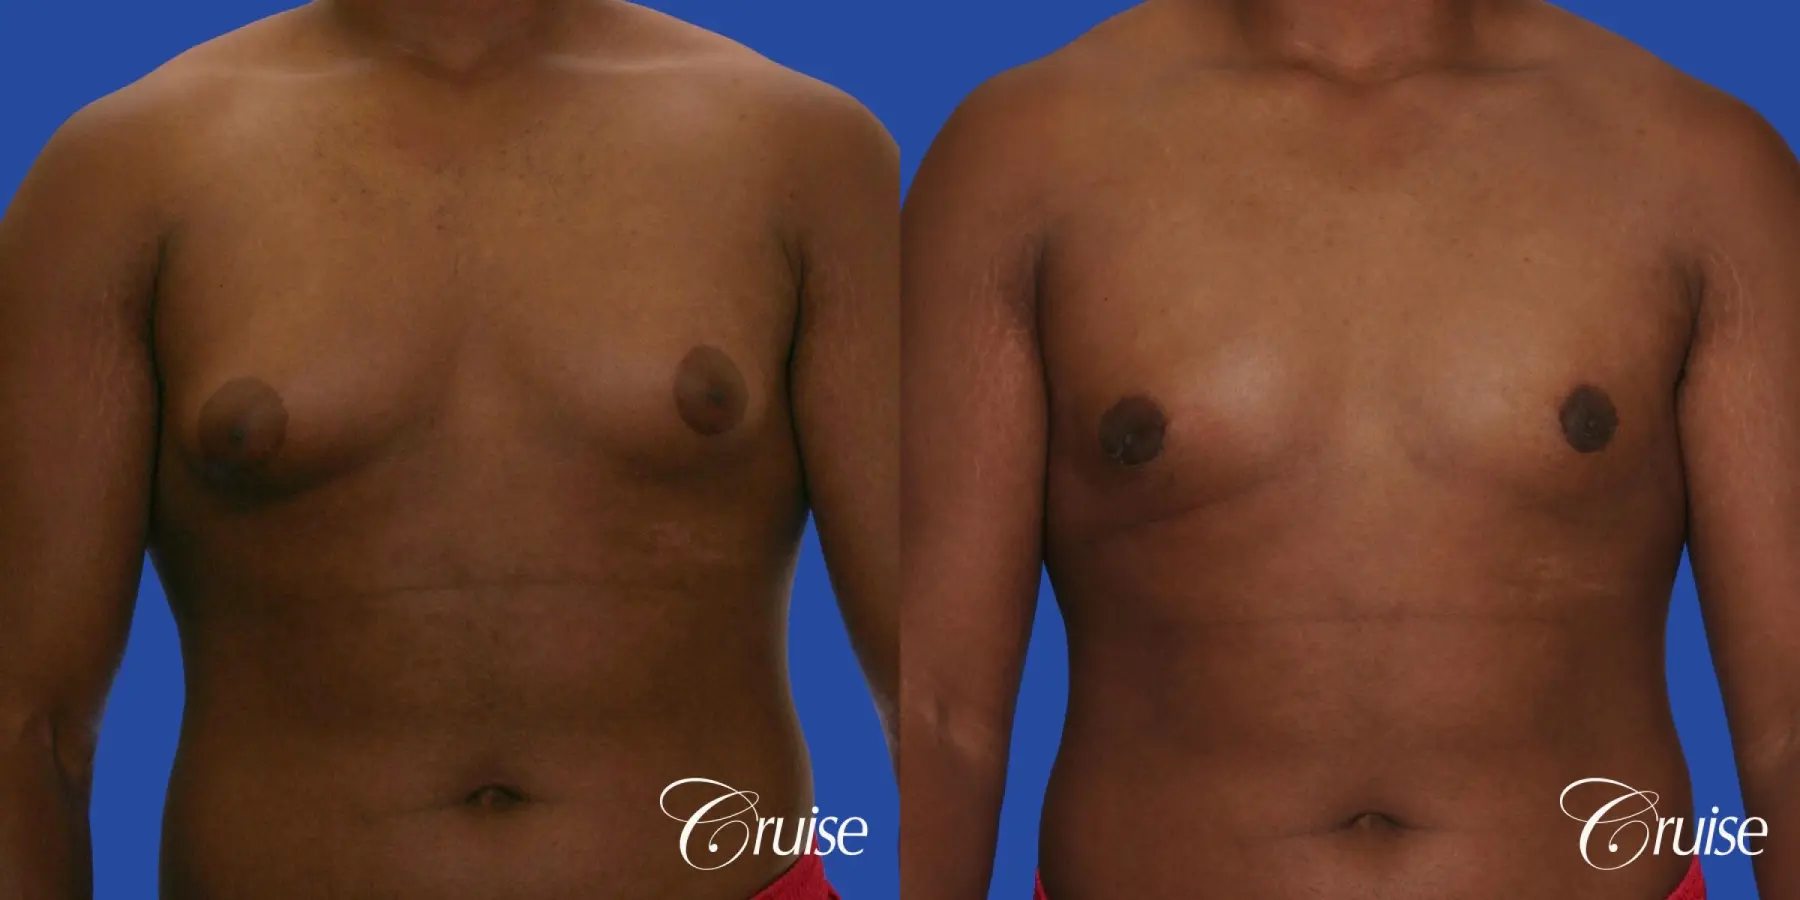 male breast moderate gynecomastia on young teen - Before and After 1